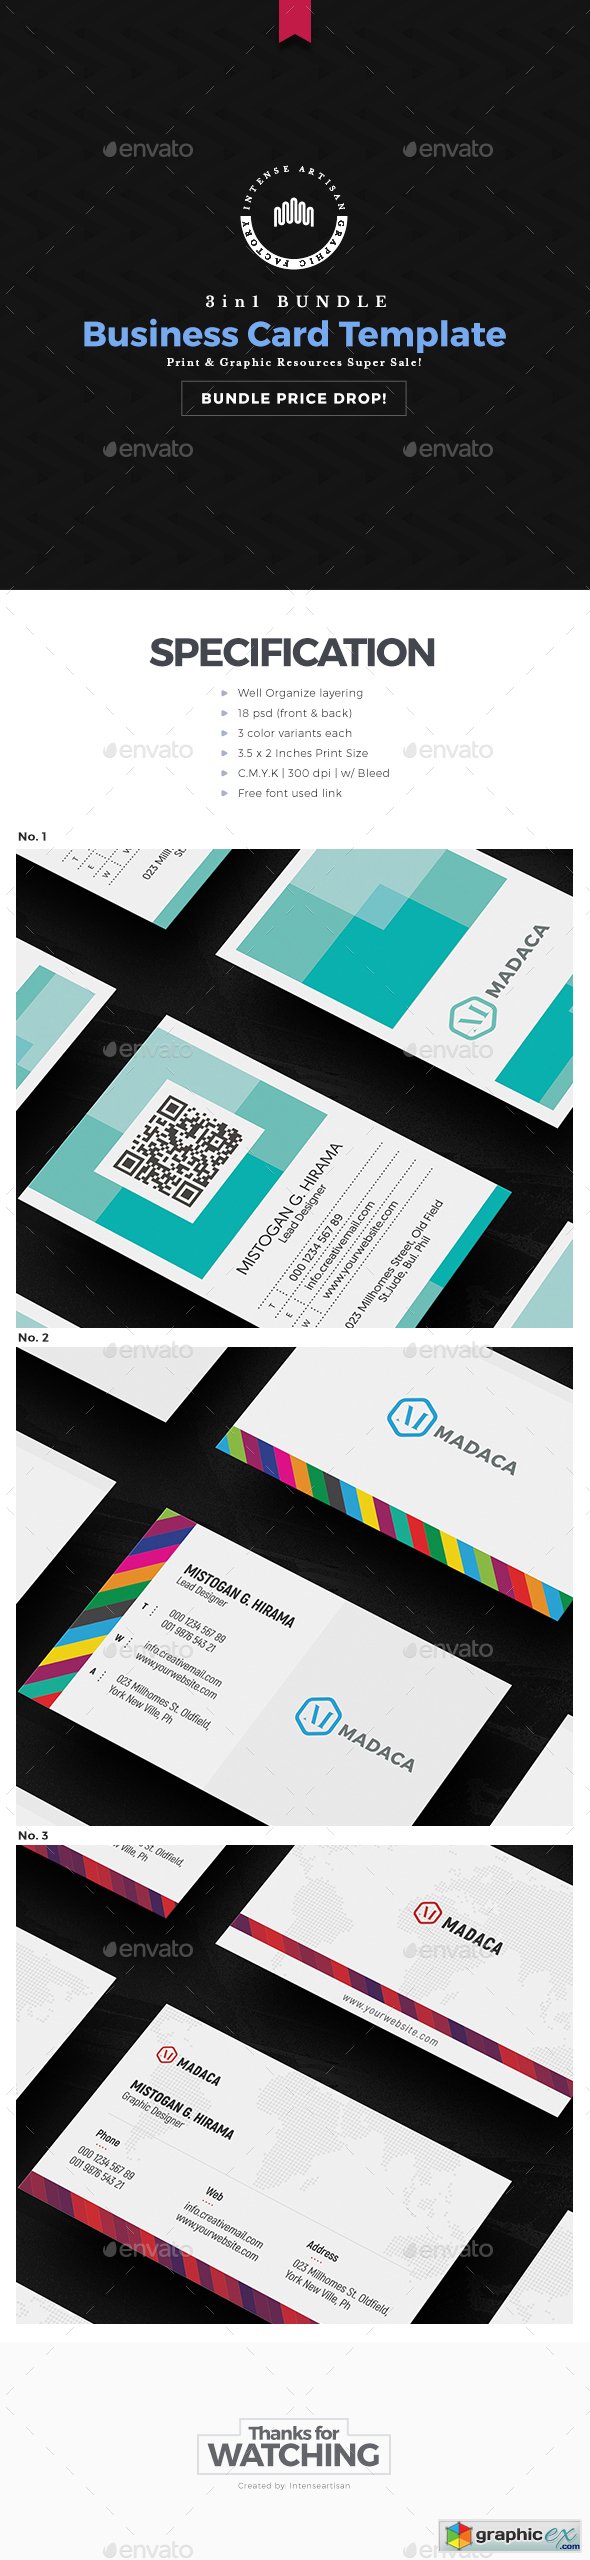 Business Card - 3in1 Bundle